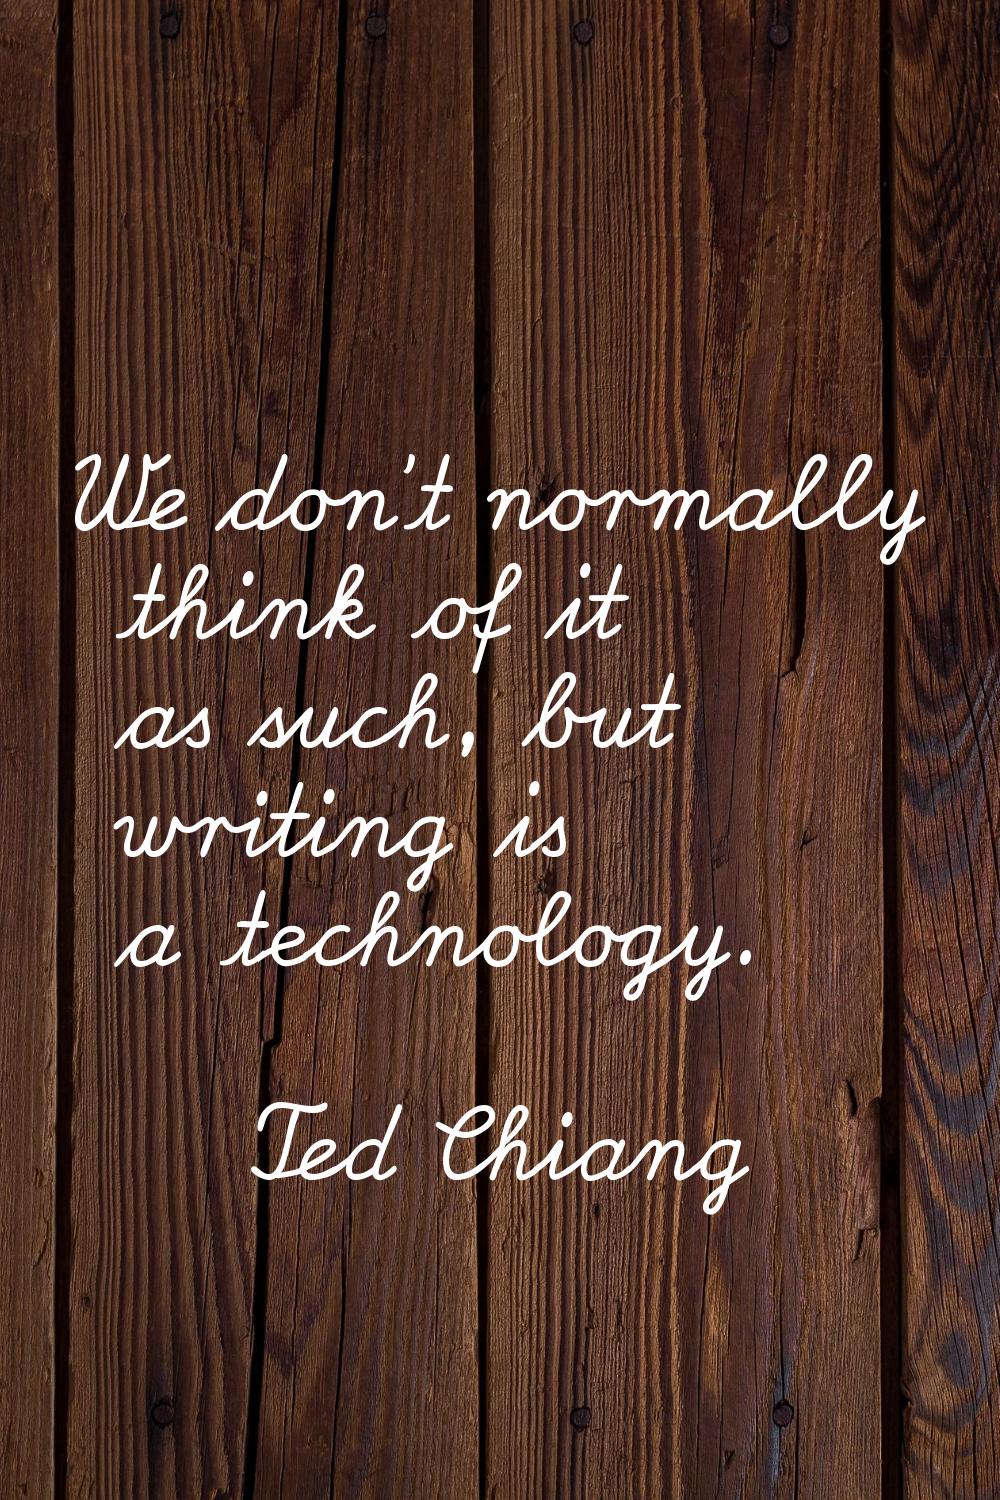 We don't normally think of it as such, but writing is a technology.